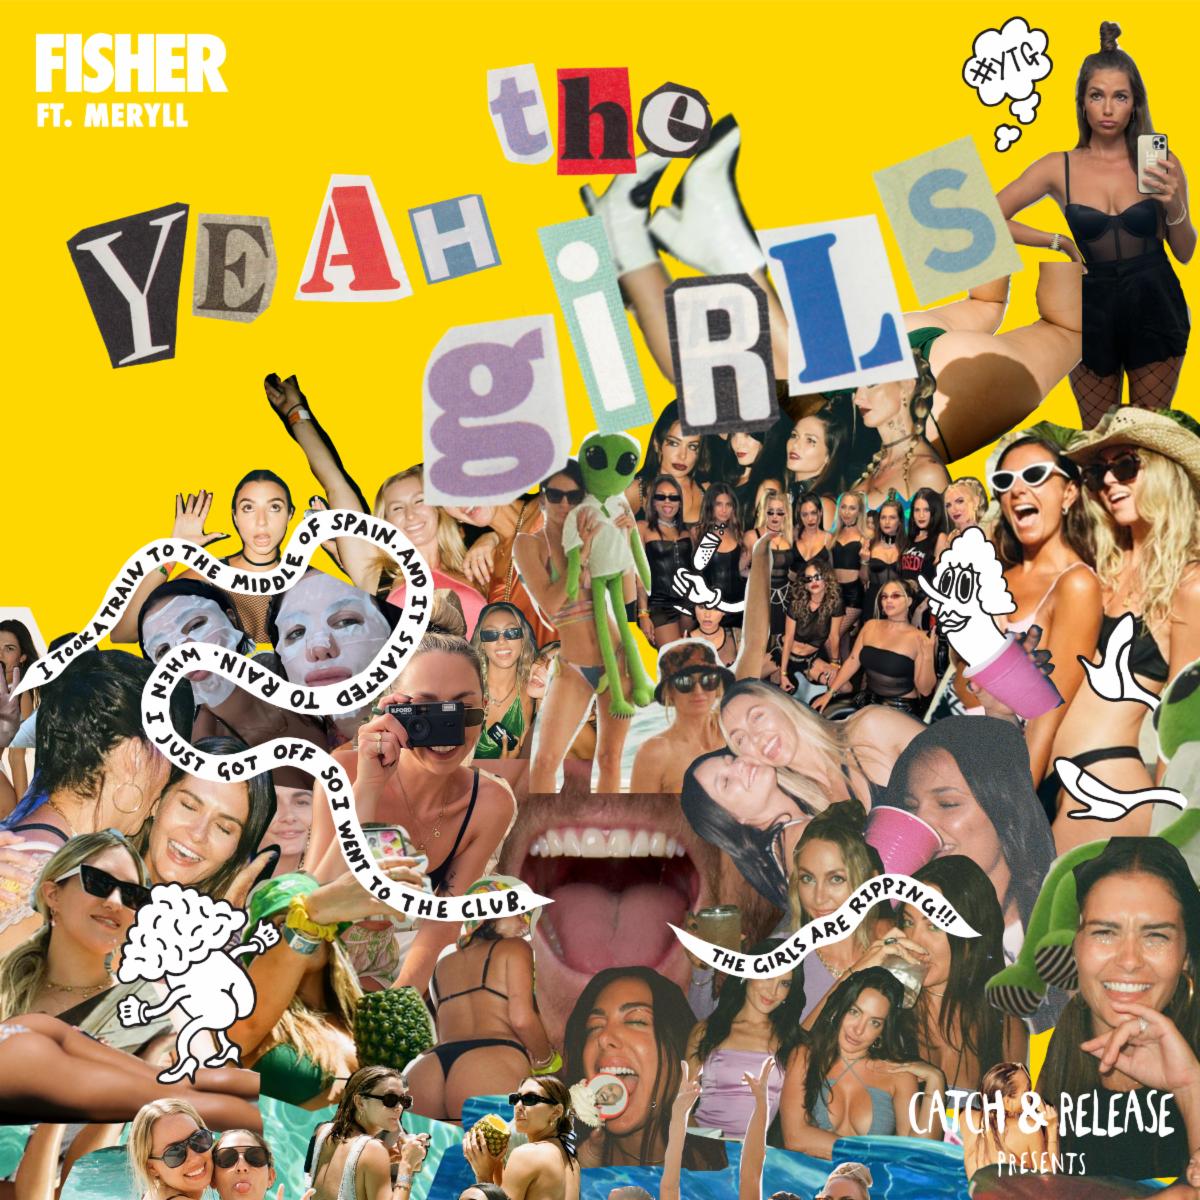 FISHER Continues Hot Streak With New Single 'Yeah The Girls'!